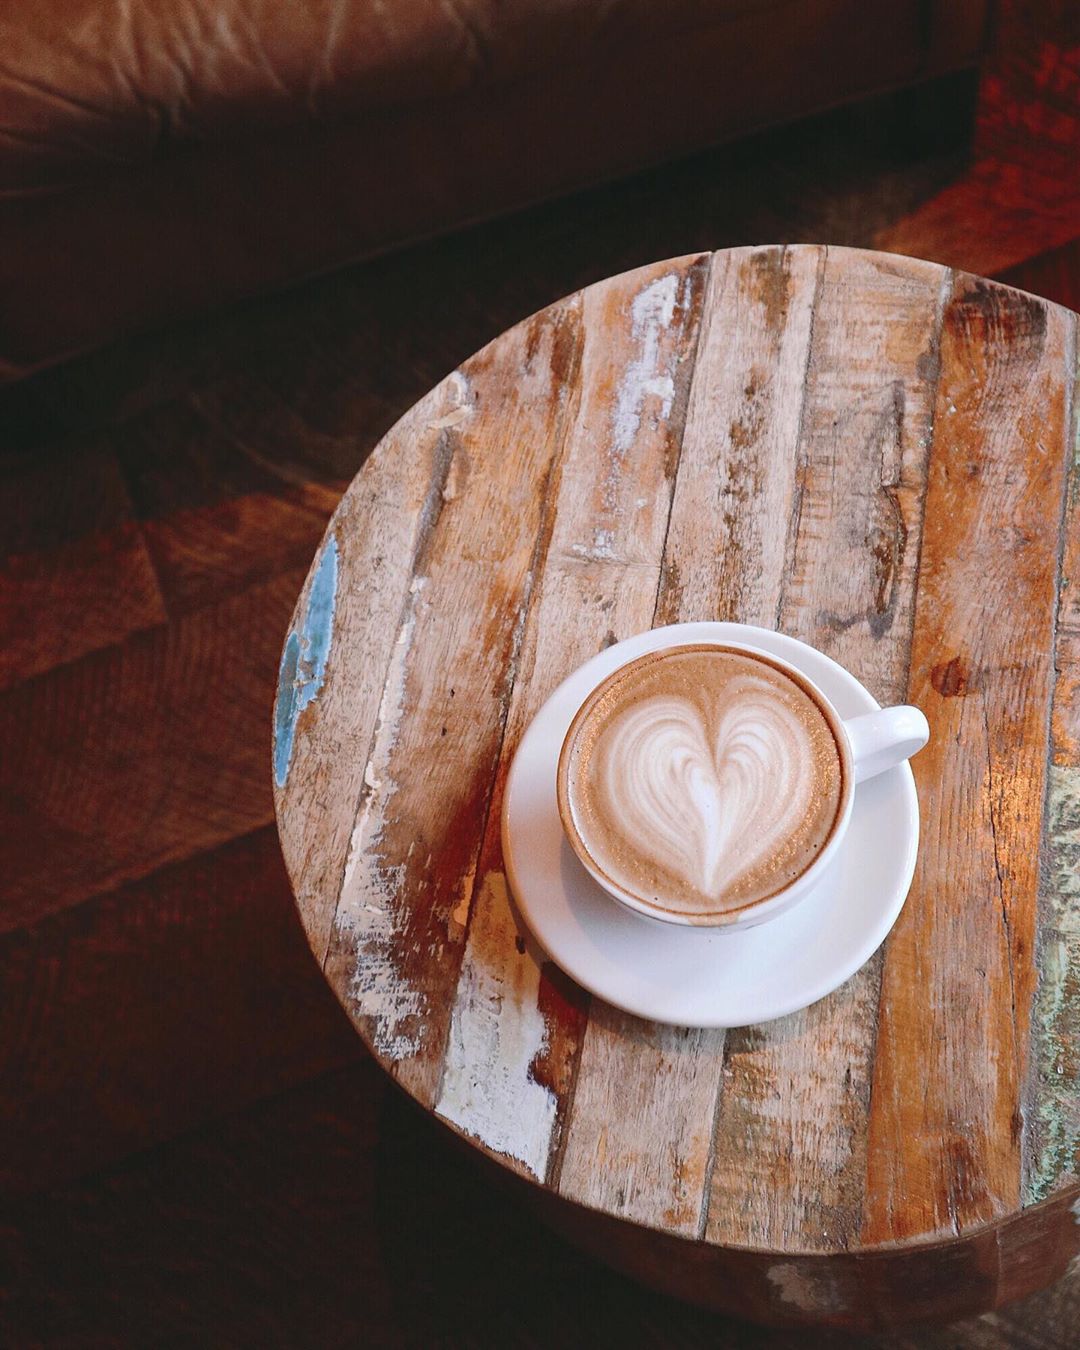 Latte with a heart on it sitting on a wood table. Photo by Instagram user @gloria_fitfatfun